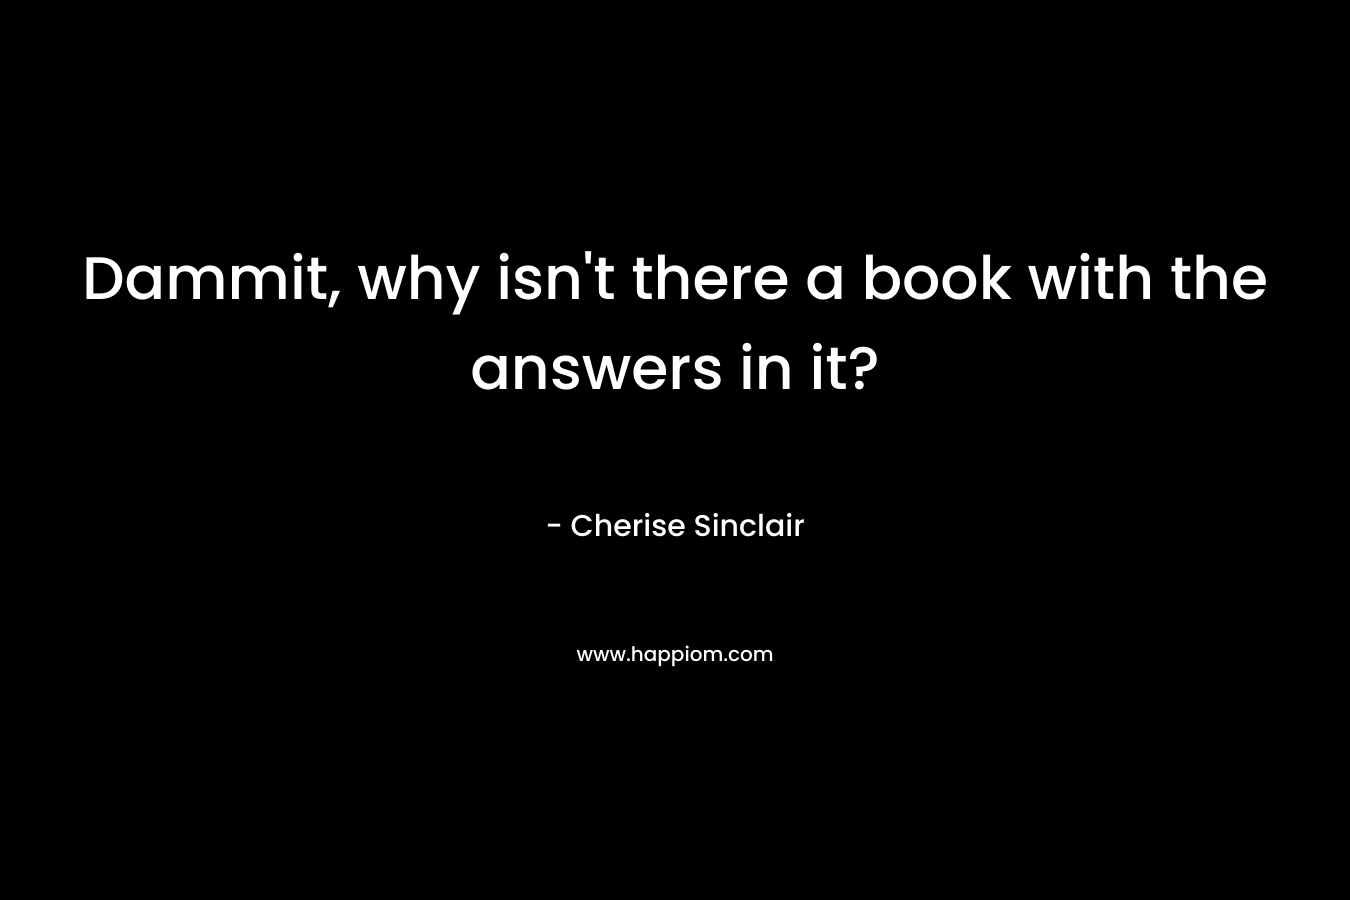 Dammit, why isn't there a book with the answers in it?